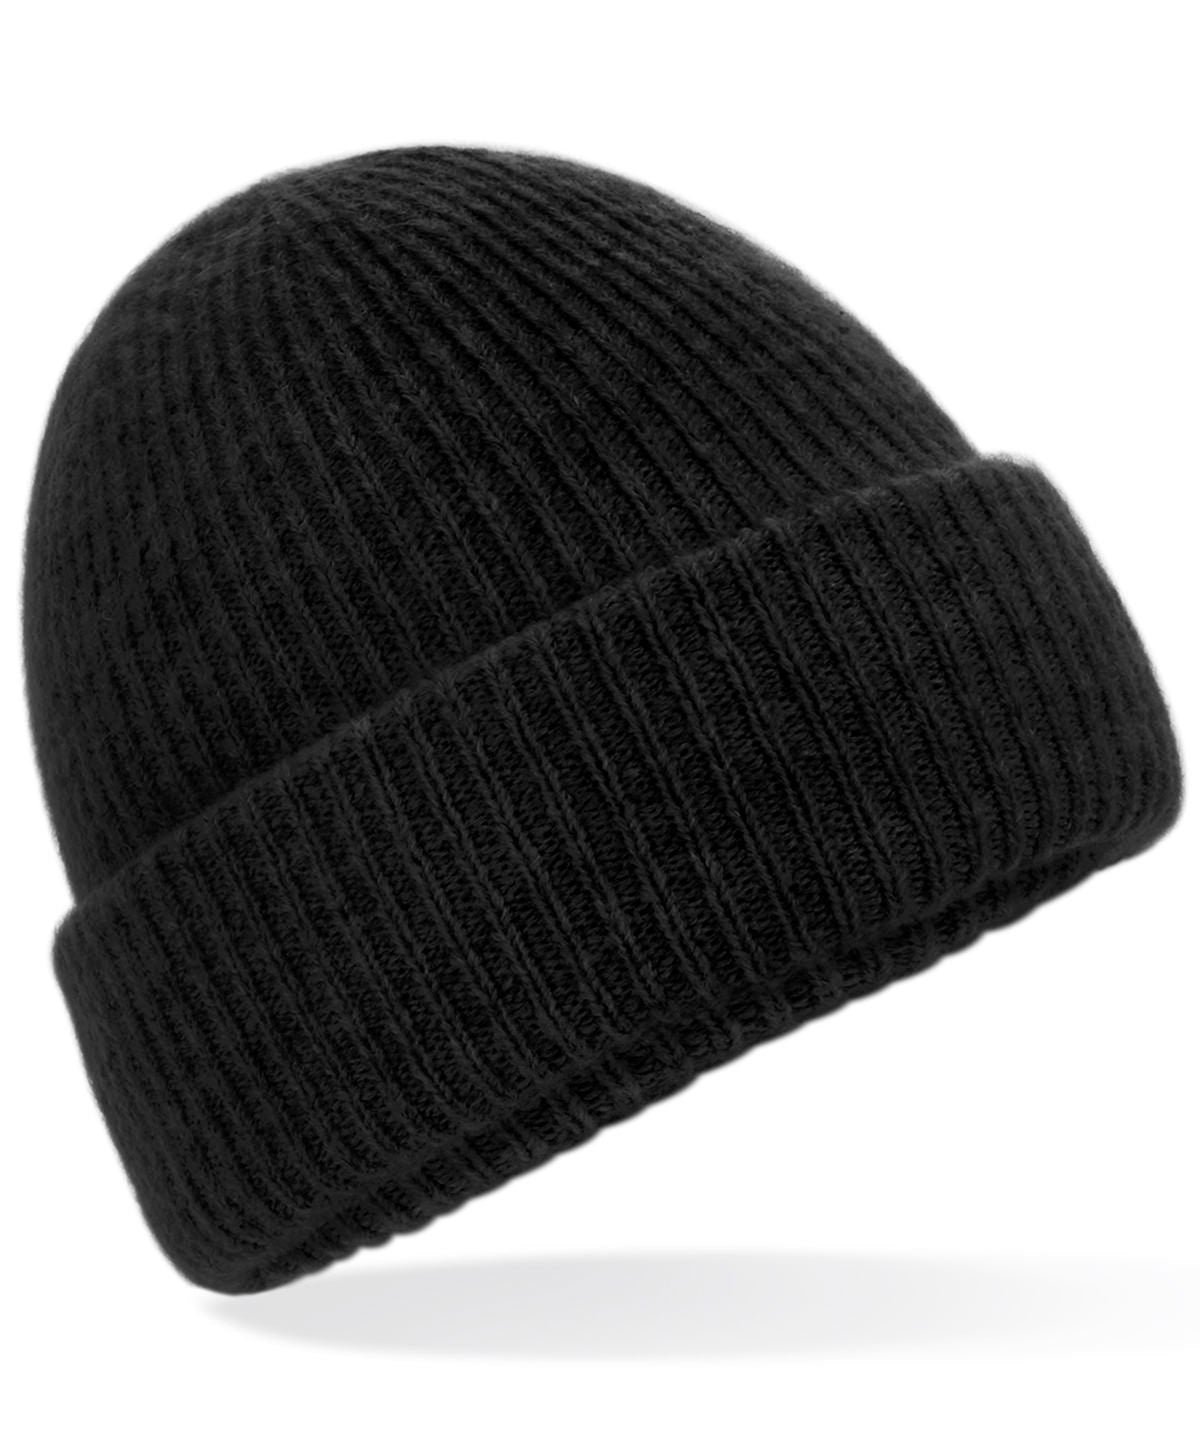 Cosy Ribbed Beanie BC386 | Warm Winter Beanie Hat | Black Woolly Hat